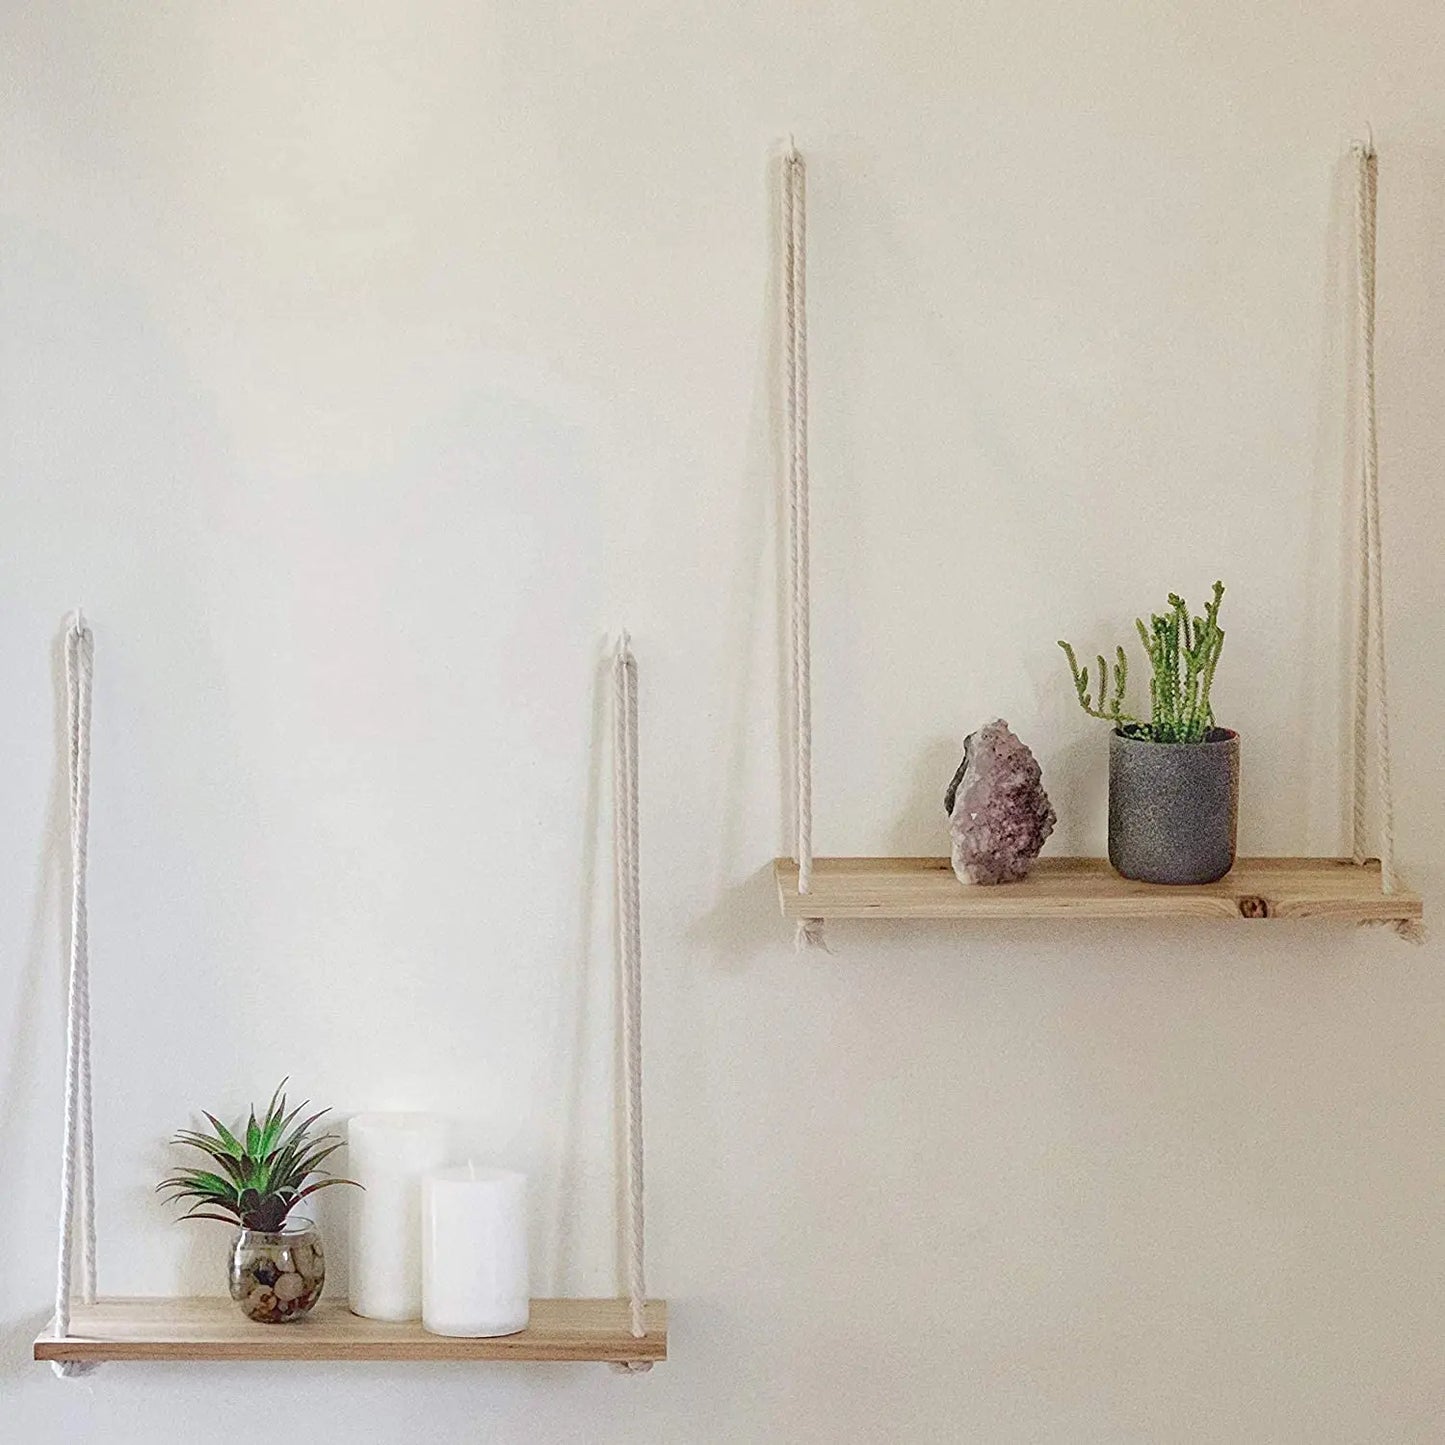 Wooden Rope Wall Hanging Shelve